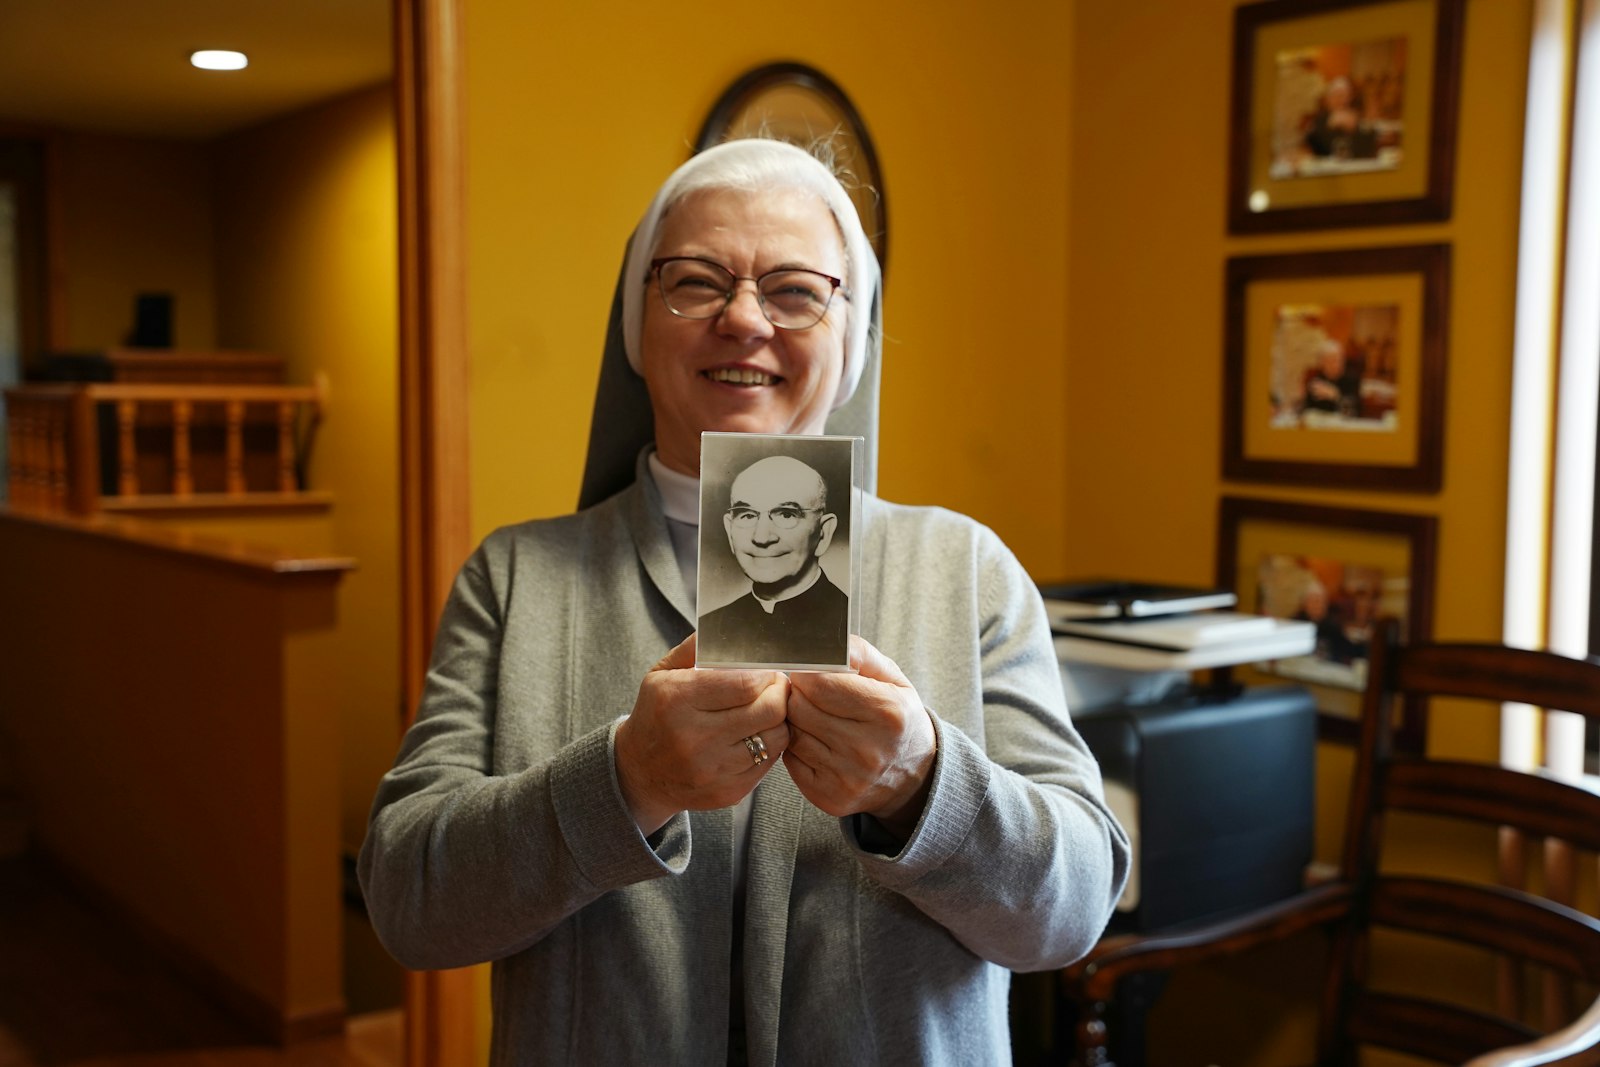 Sr. Kokolus holds up a picture of Fr. Ignacy Posadzy, the co-founder of the Society of Christ, who led a congregation of trained Polish priests to leave Poland and go out and minister to the Polish diaspora. Fr. Posadzy was recently declared venerable by Pope Francis.